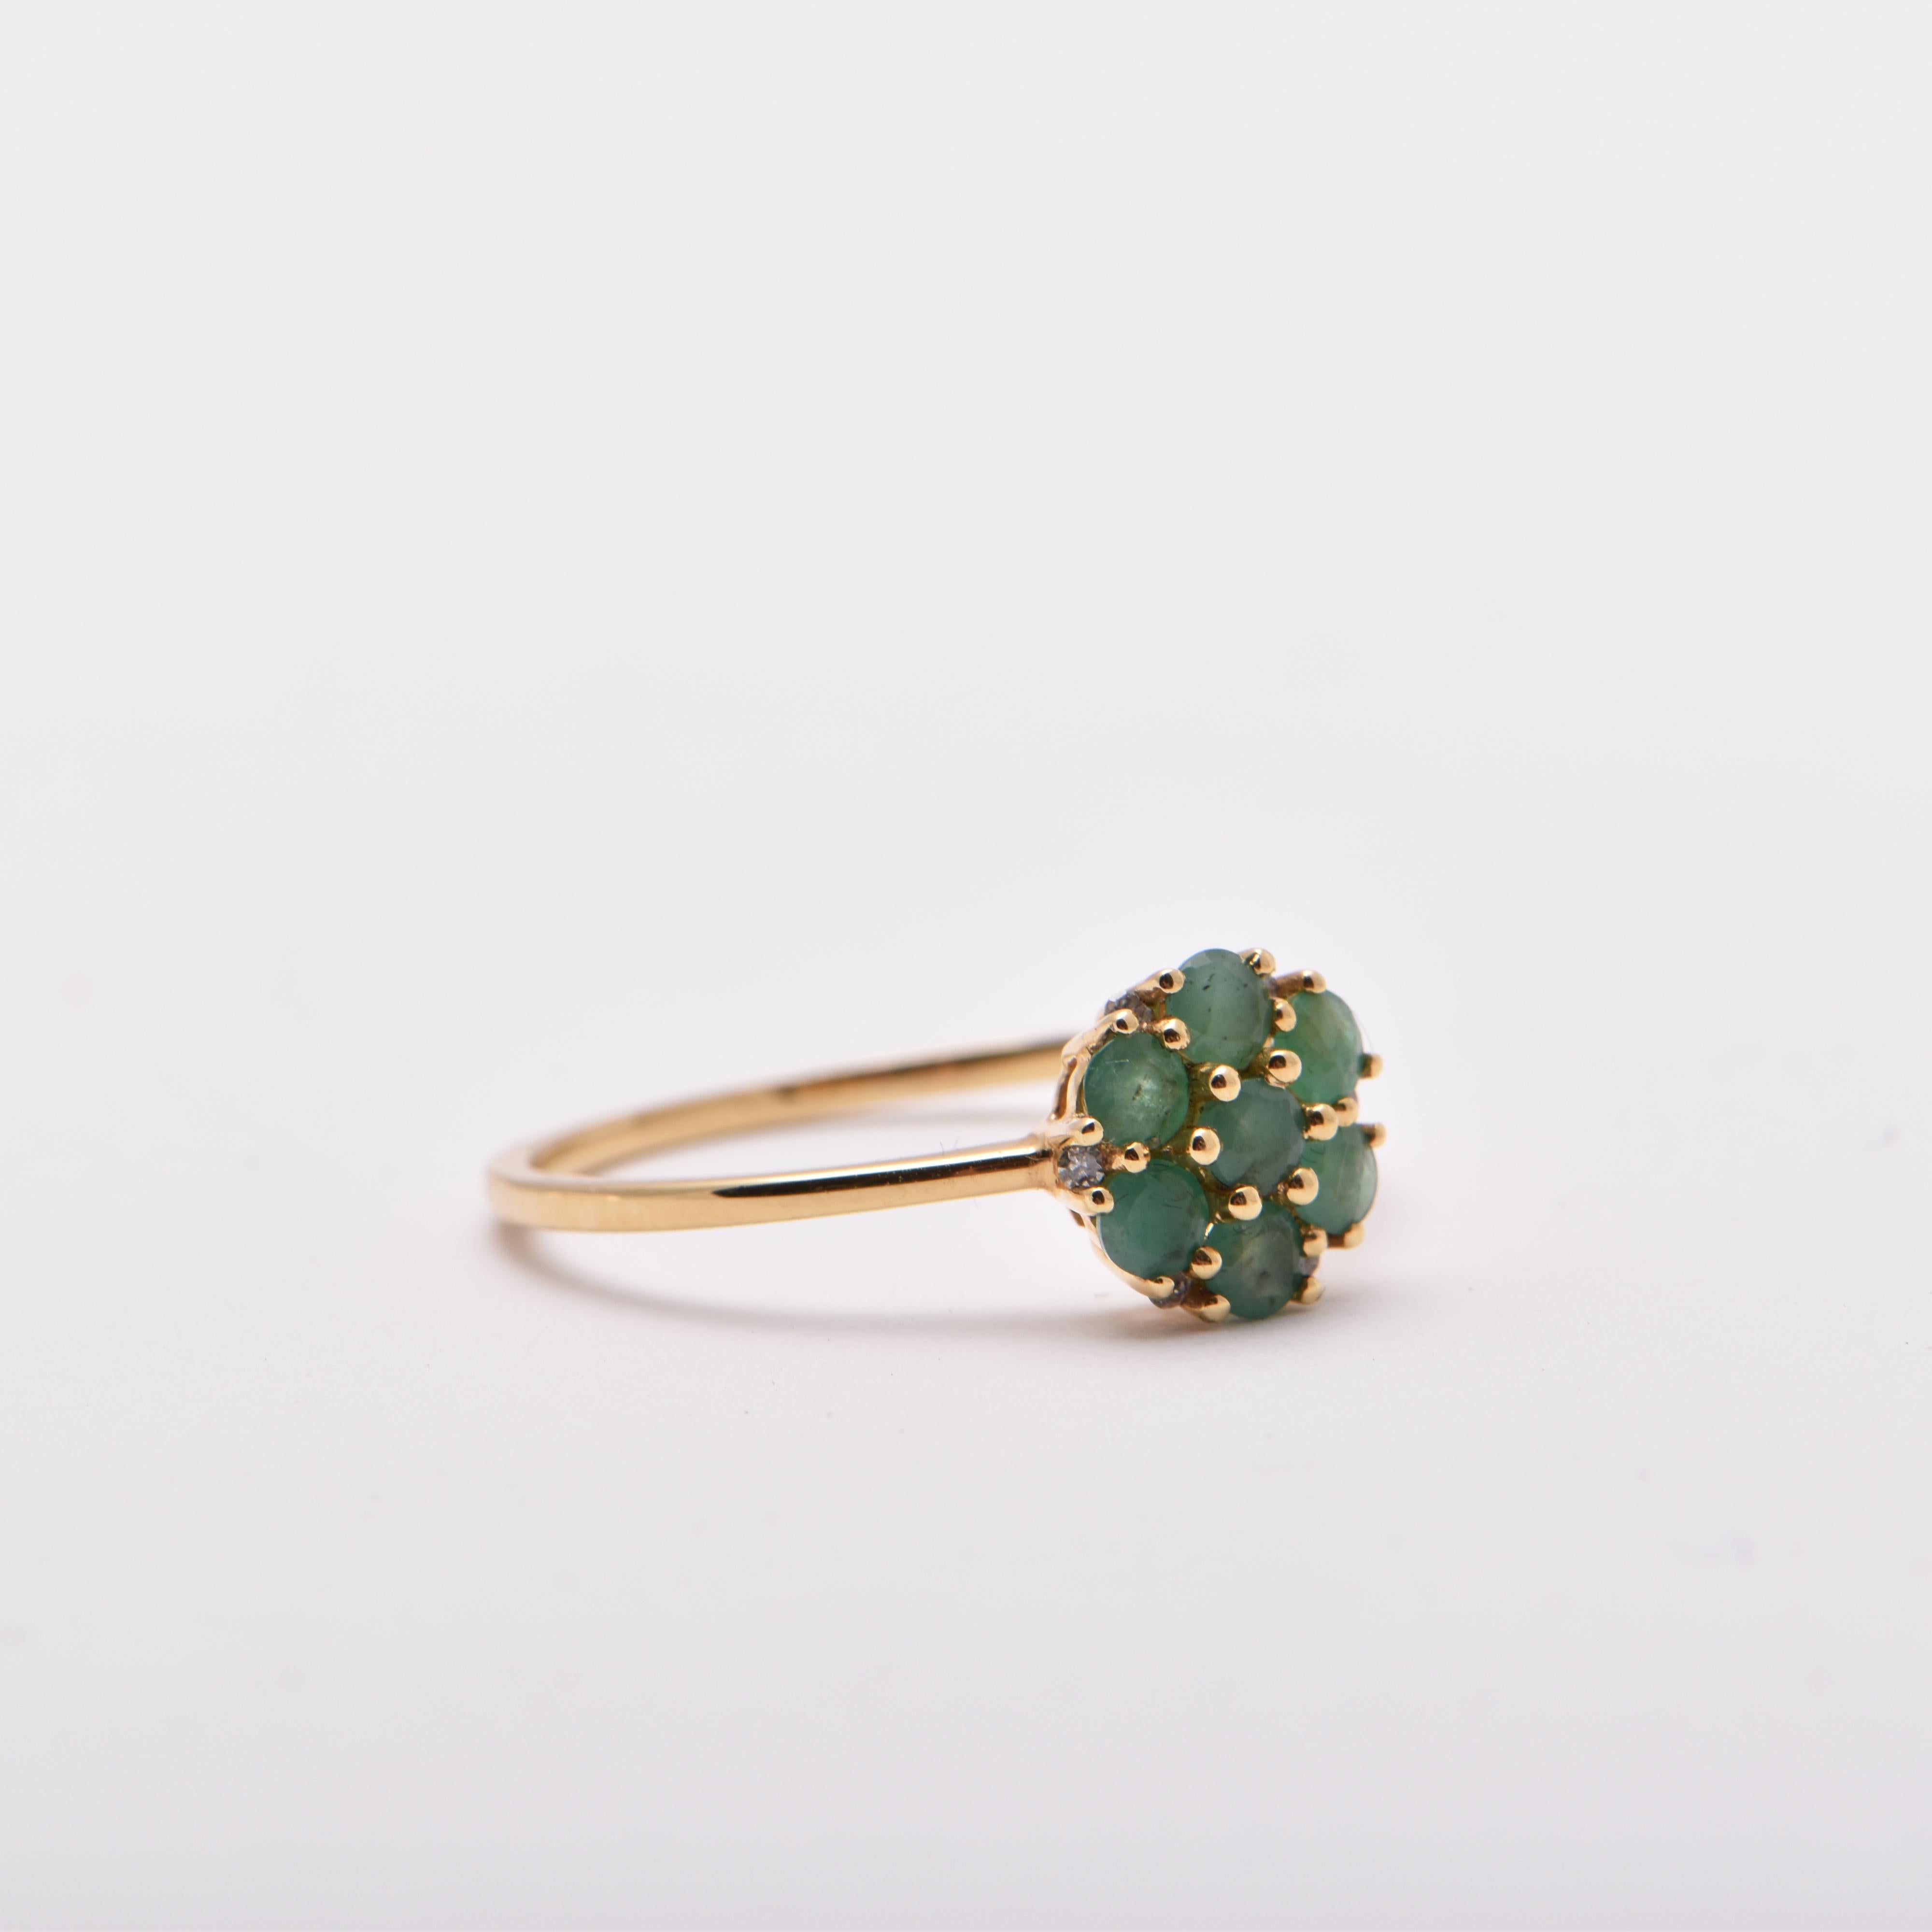 Emerald and Diamond Cluster Style Ring in 18 Carat Yellow Gold by Cartmer Jewellery  

Size N 

7 Emeralds totalling 0.47 Carats  
6 Diamonds totalling 0.04 Carats  
18 Carat Yellow Gold Ring   

FREE express postage usually 3-4 days Sydney to New